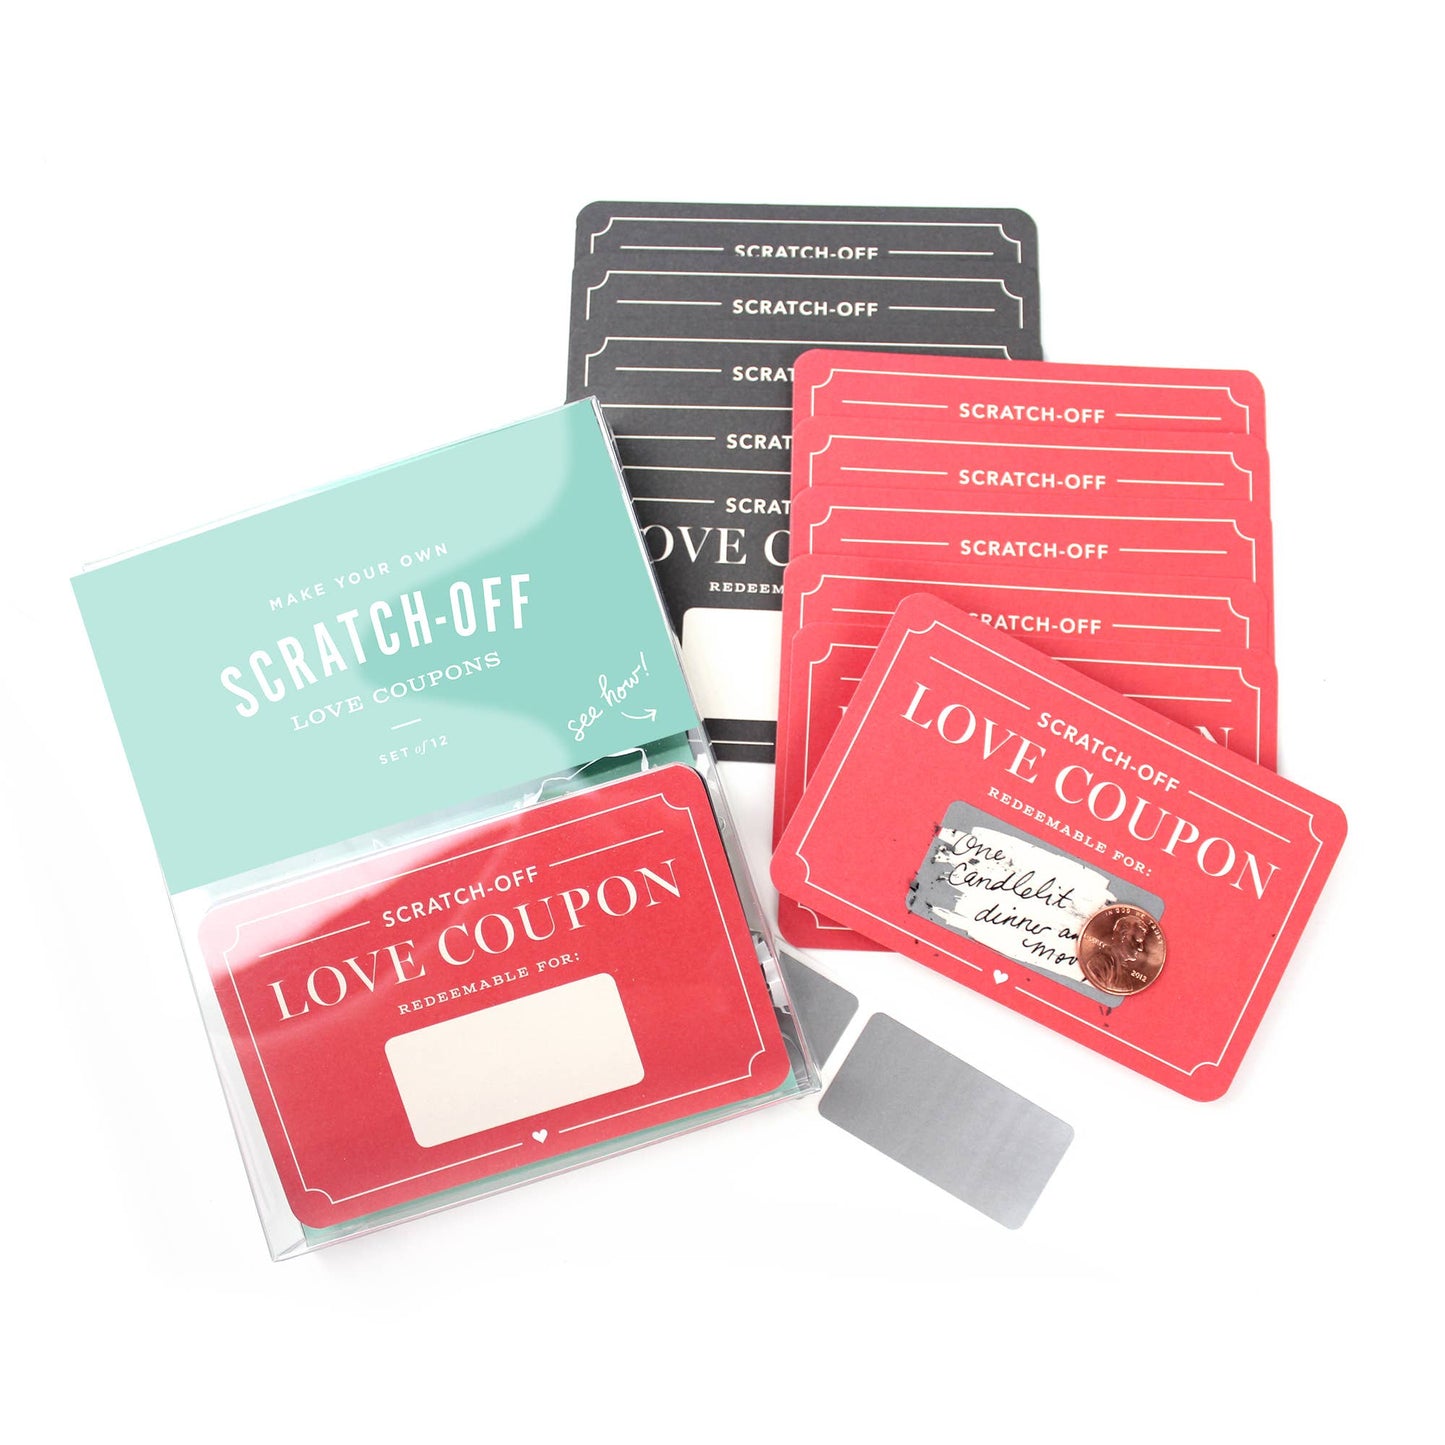 Inklings Paperie: Scratch-off Love Coupons